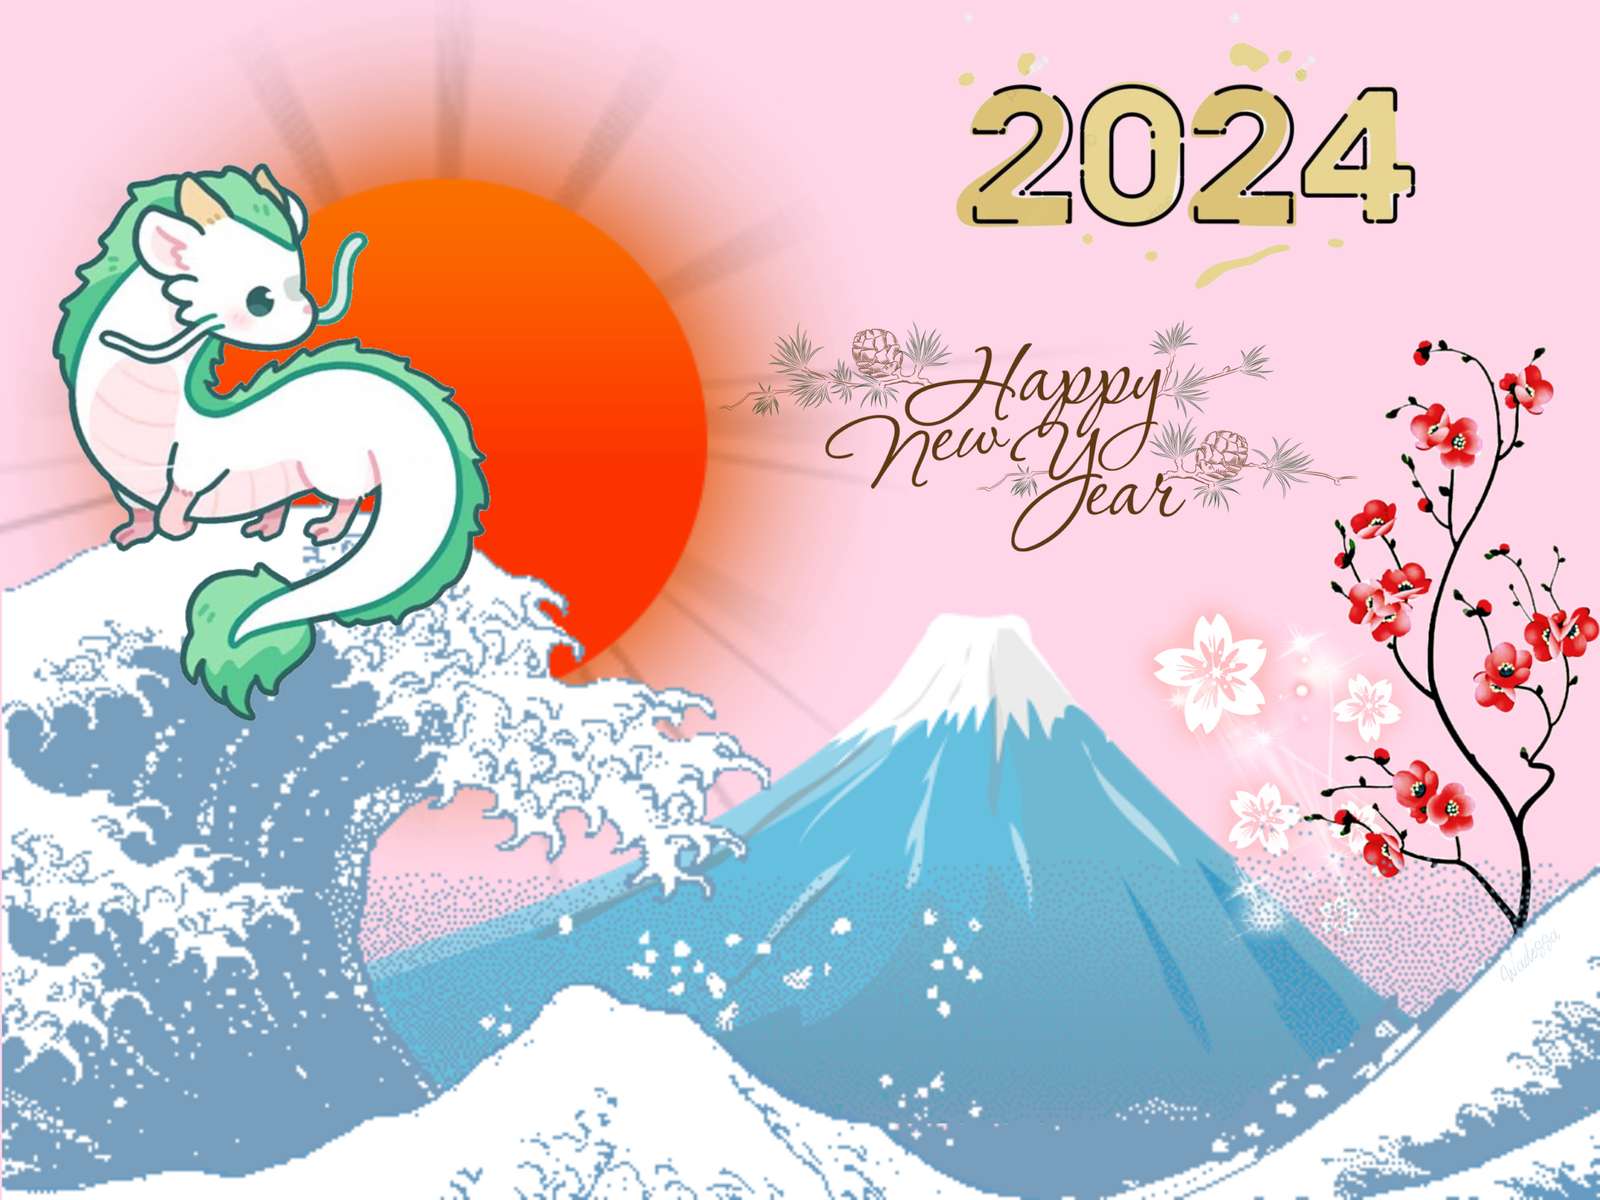 2024 greetings online puzzle